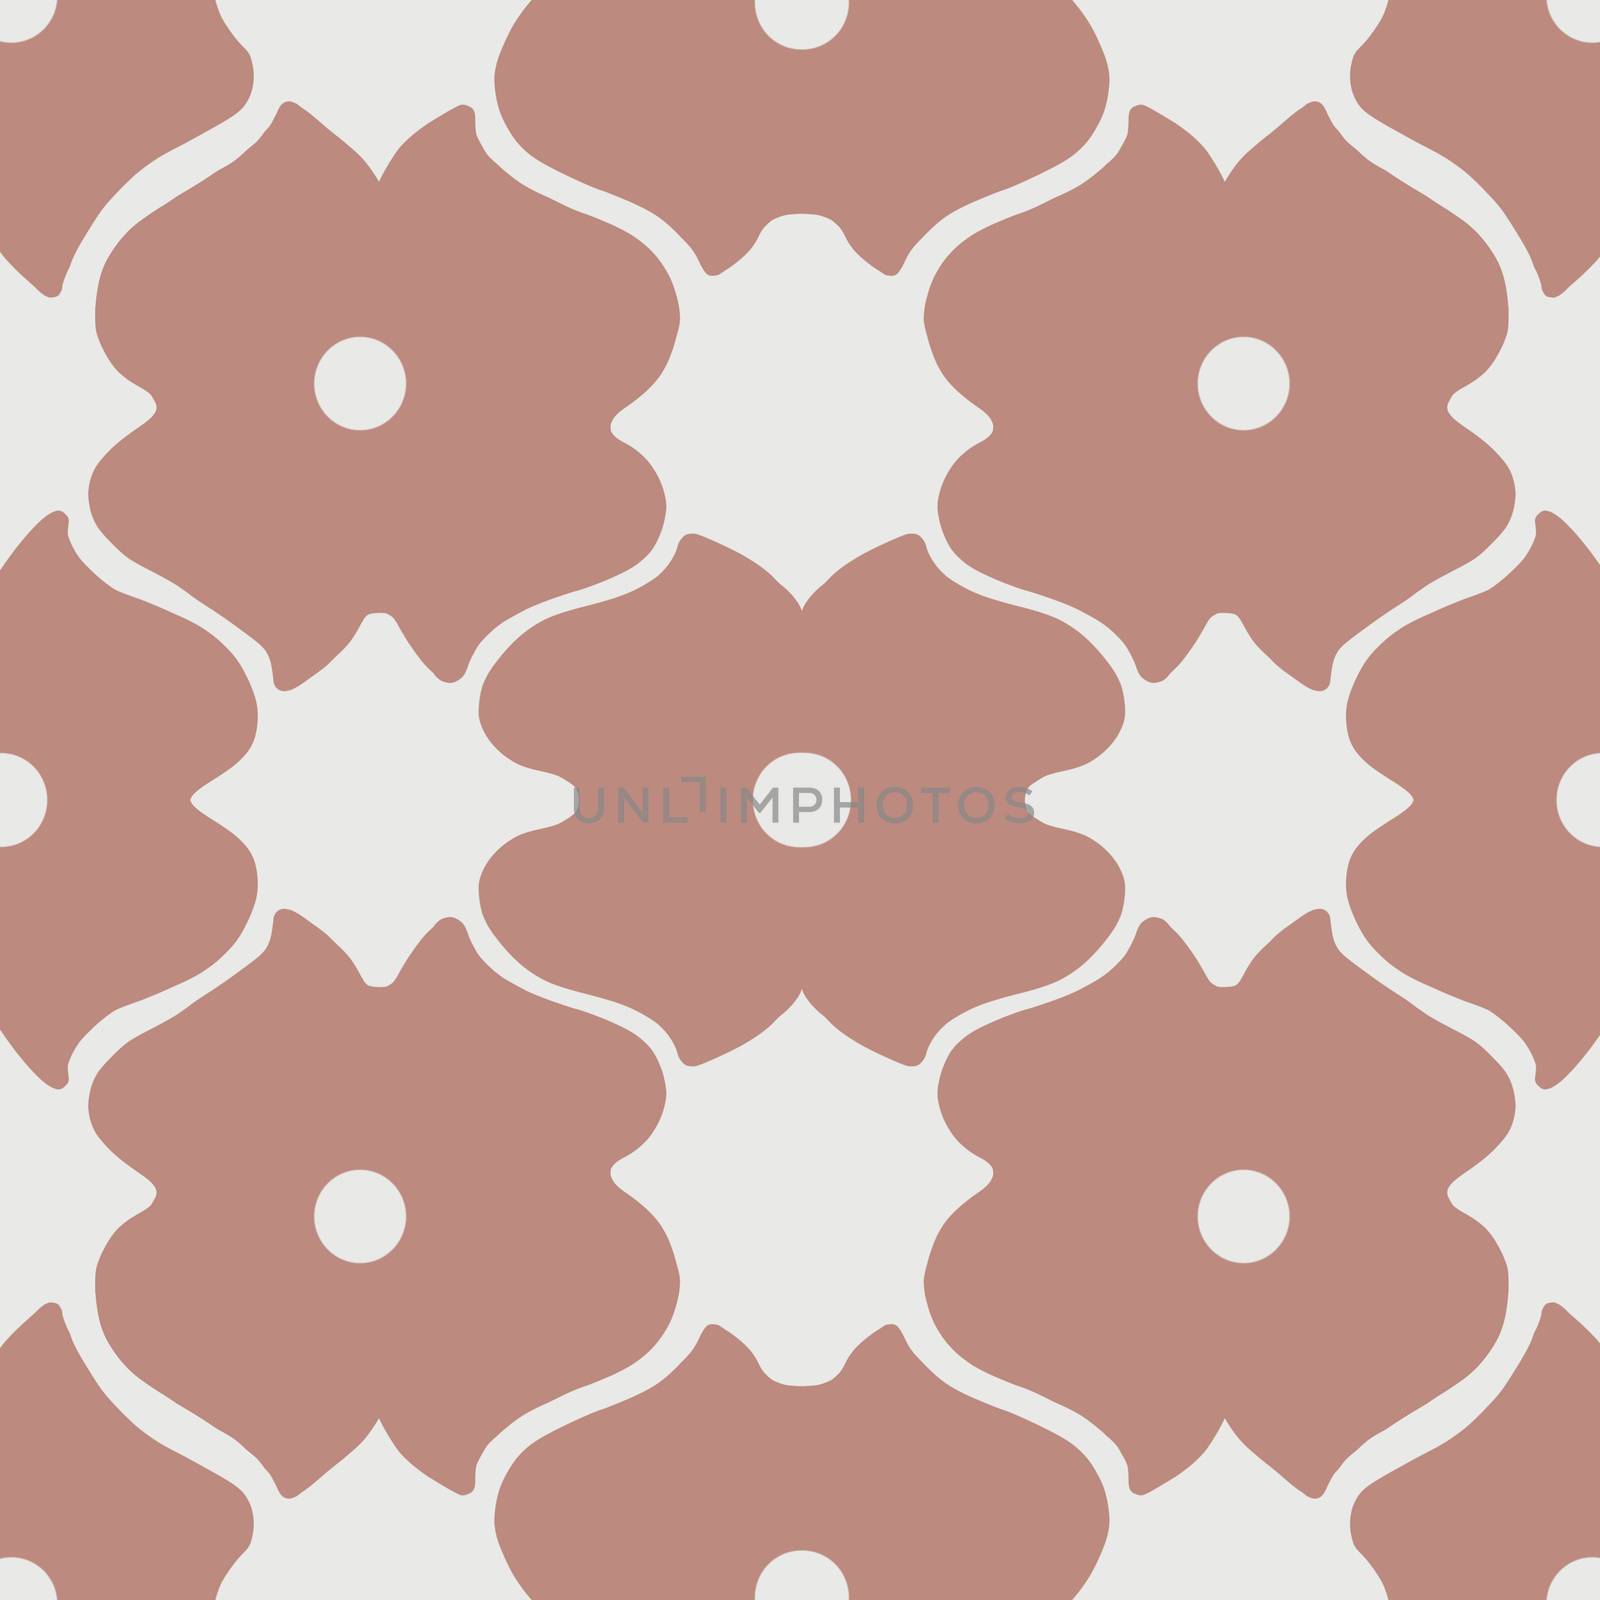 Hand drawn simple pattern element with ethnic motif in umber colors